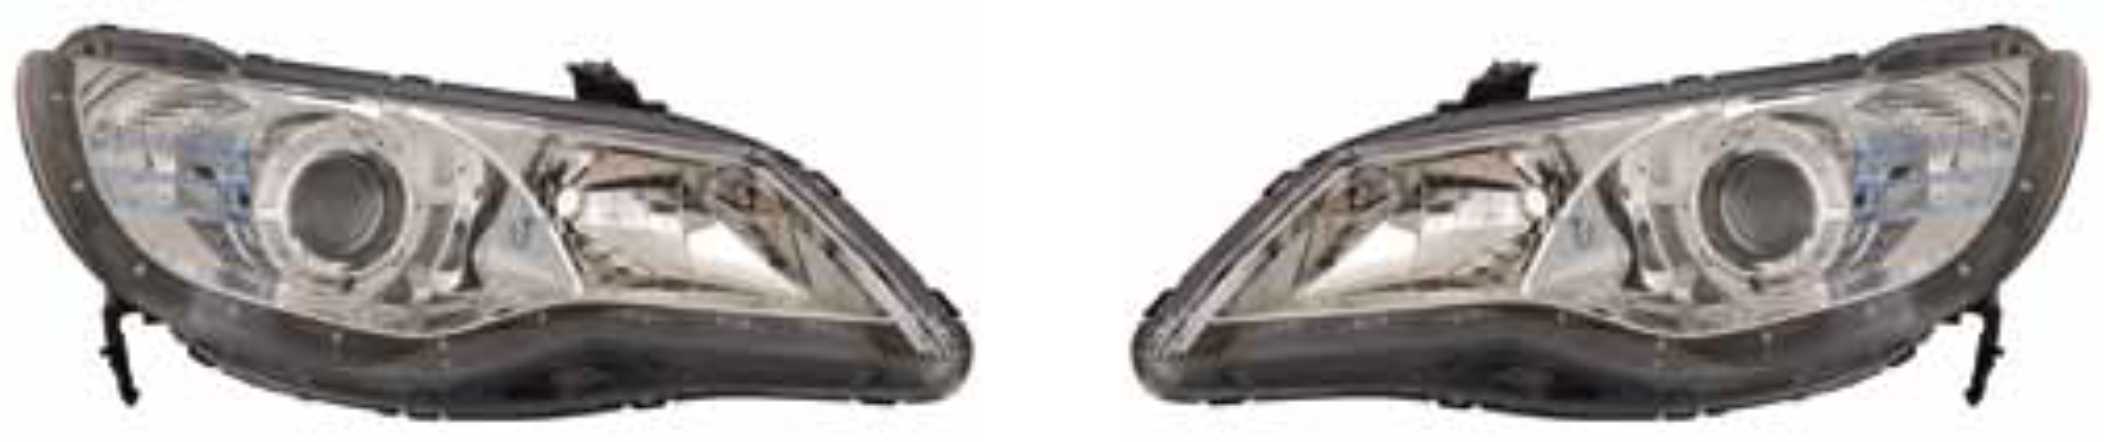 HEA500871 - 2004355 - CIVIC FD 05-08 HEAD LAMP PROJECTION TYPE AFTER MARKET